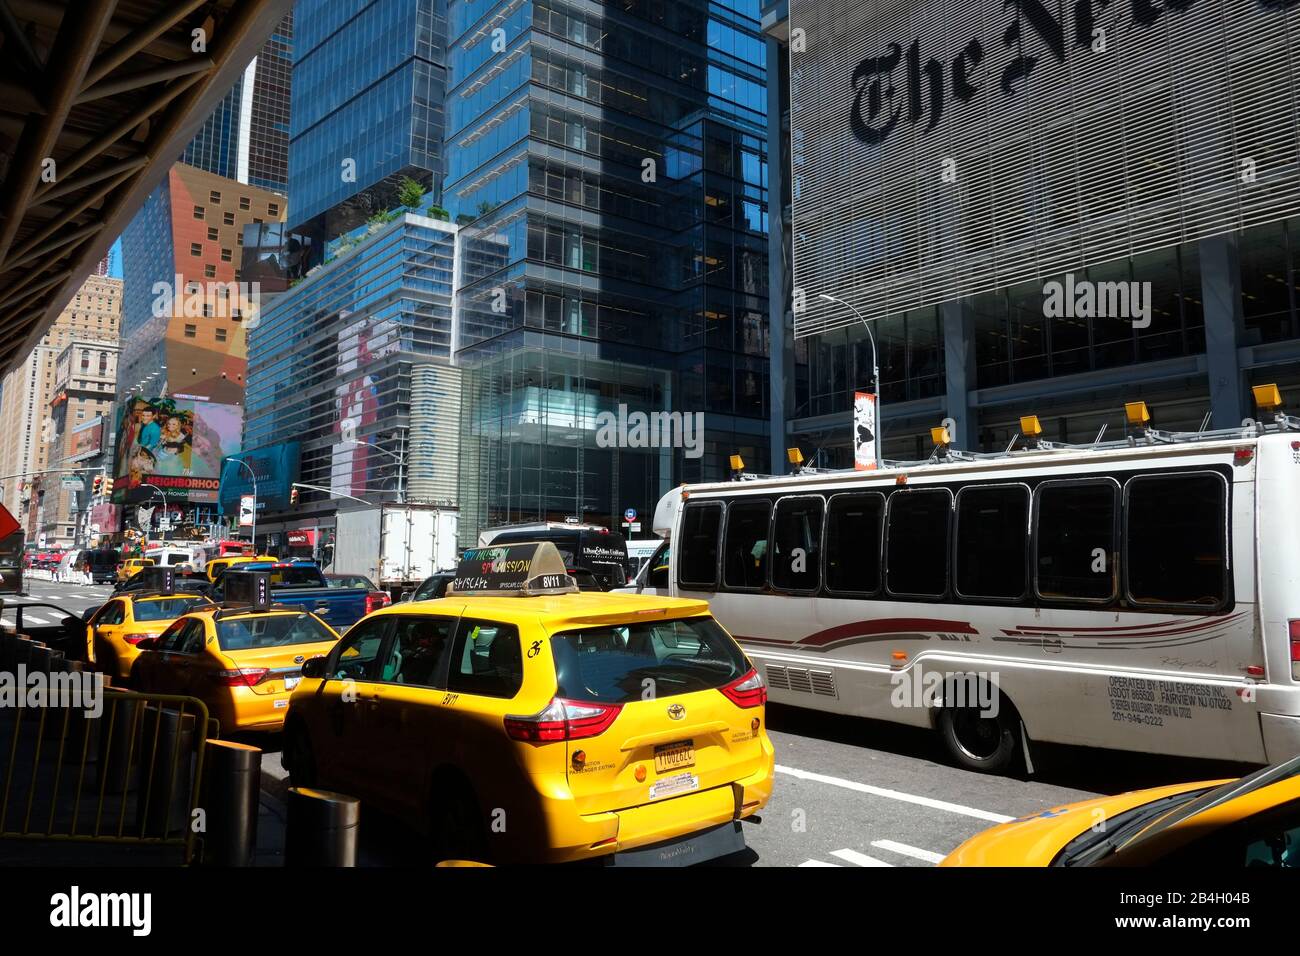 Yellow cabs waiting for passengers at Port Authority Bus Terminal with The New York Times Tower designed by Architect Renzo Piano in background. 8th Avenue, New York, USA Stock Photo